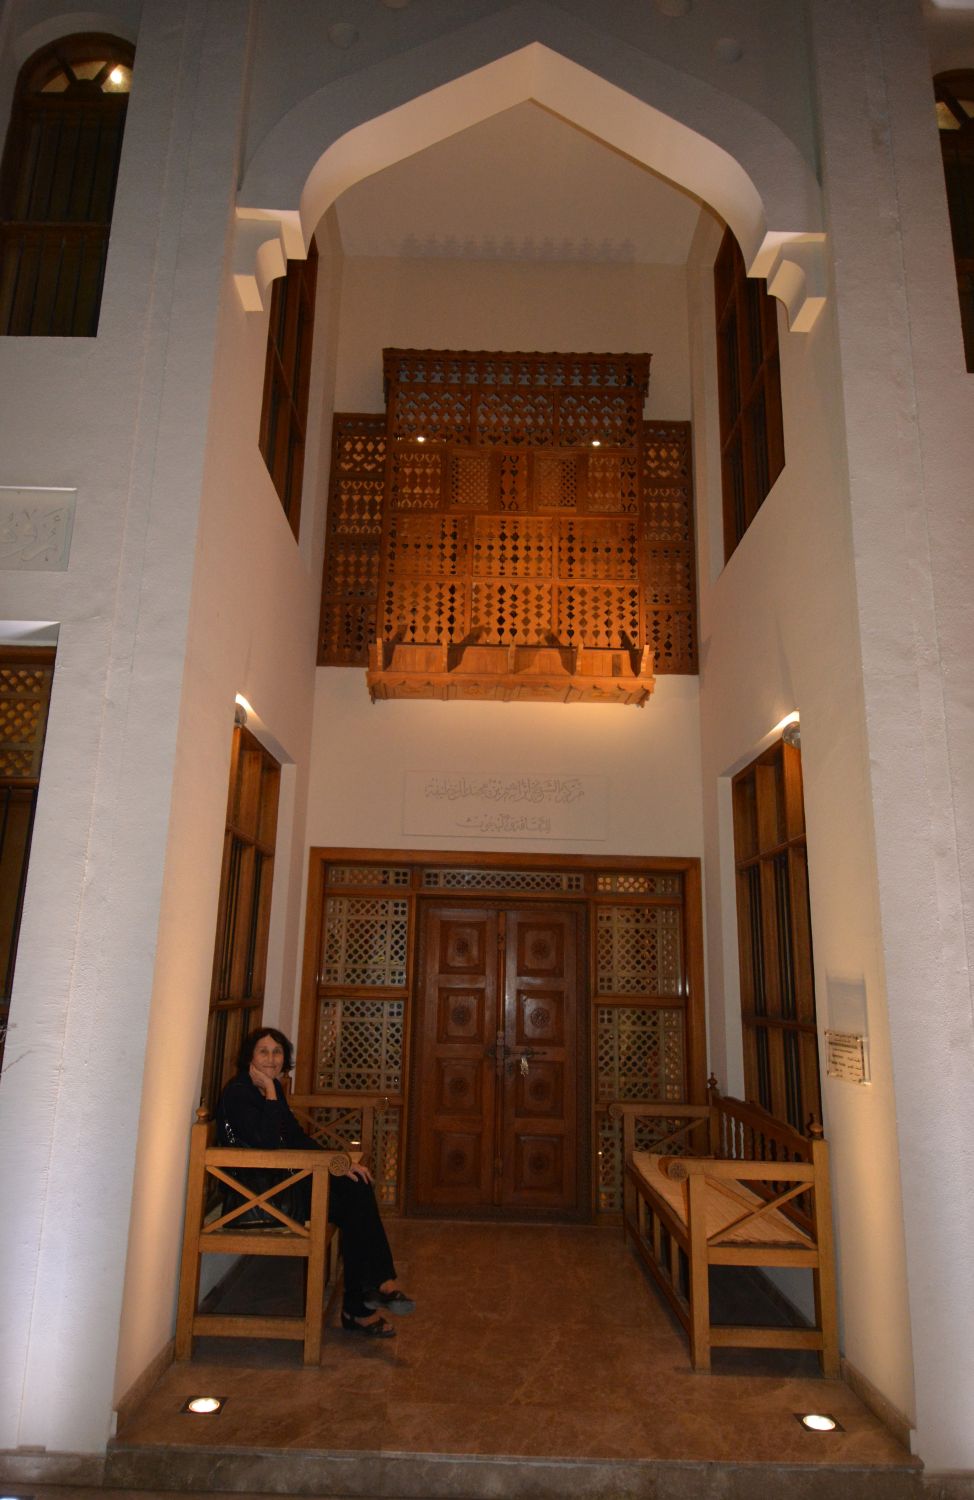 View of an iwan with a seated woman and ornate wood screens.